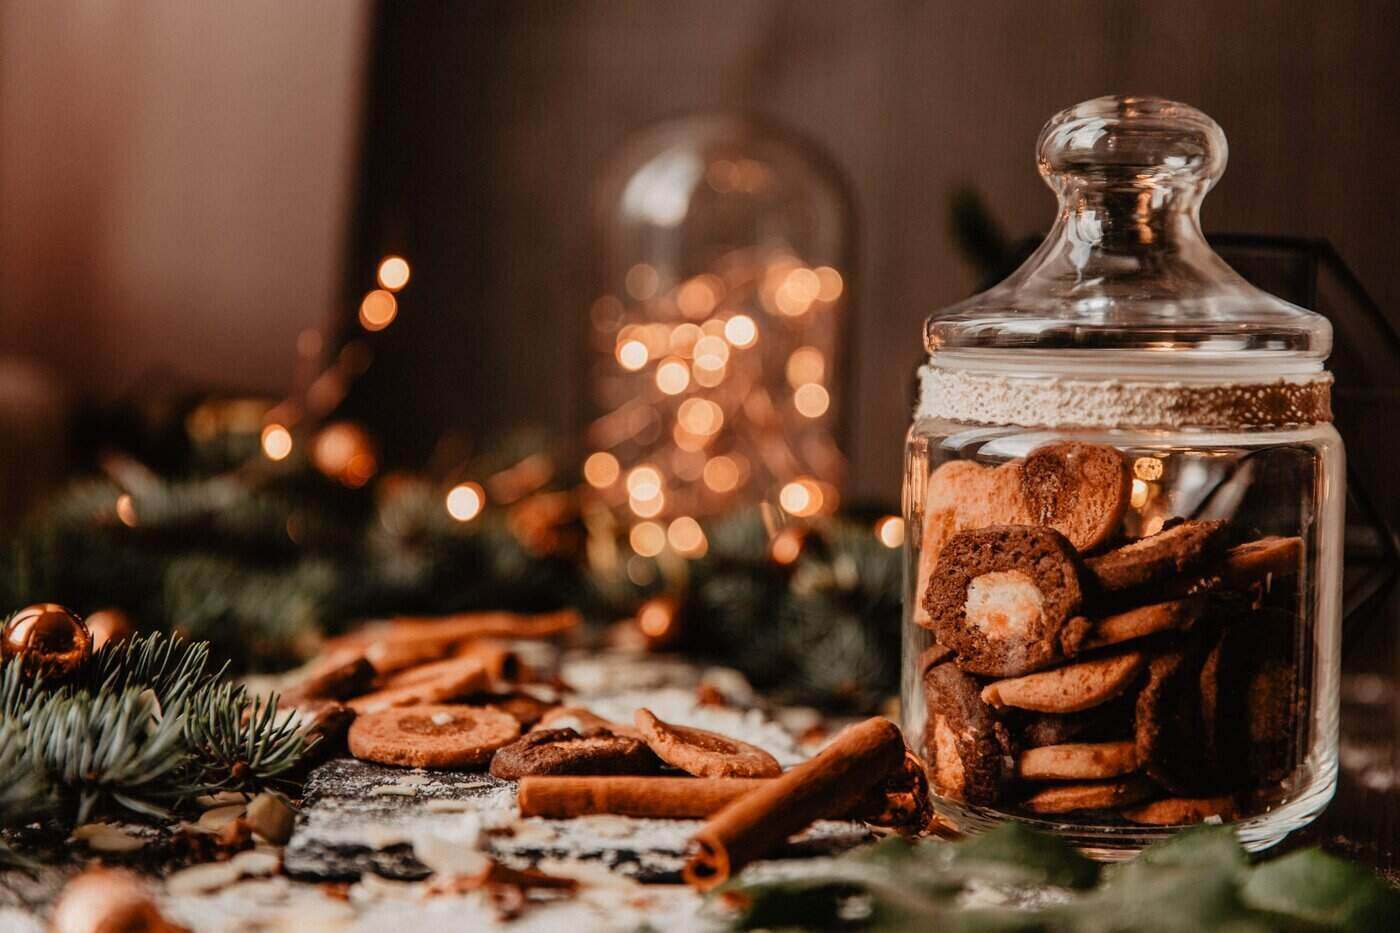 holiday cookies in jar with lights - cookbook gift buying guide